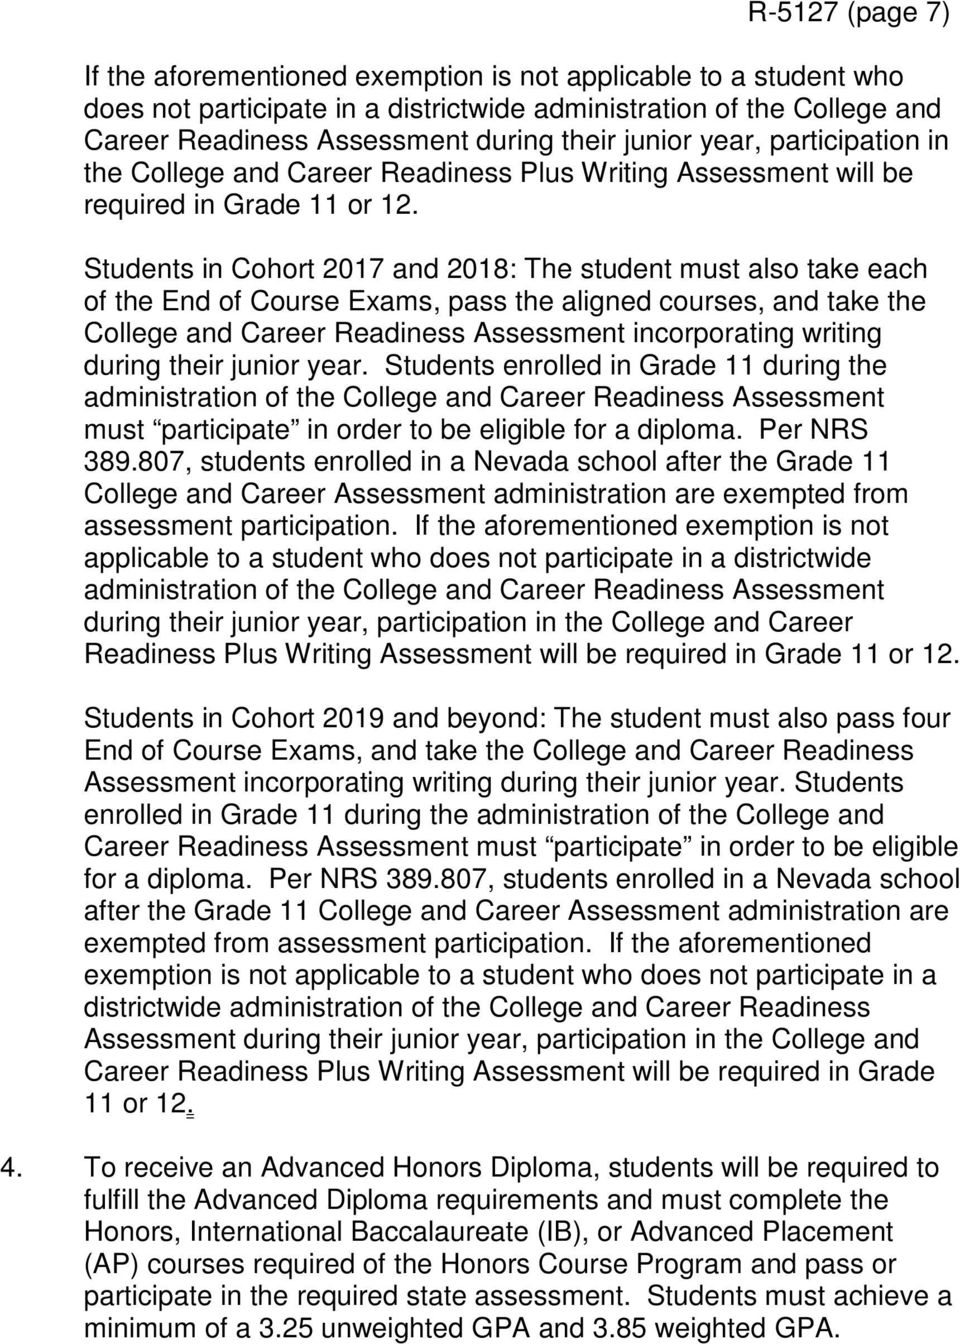 Students in Cohort 2017 and 2018: The student must also take each of the End of Course Exams, pass the aligned courses, and take the College and Career Readiness Assessment incorporating writing